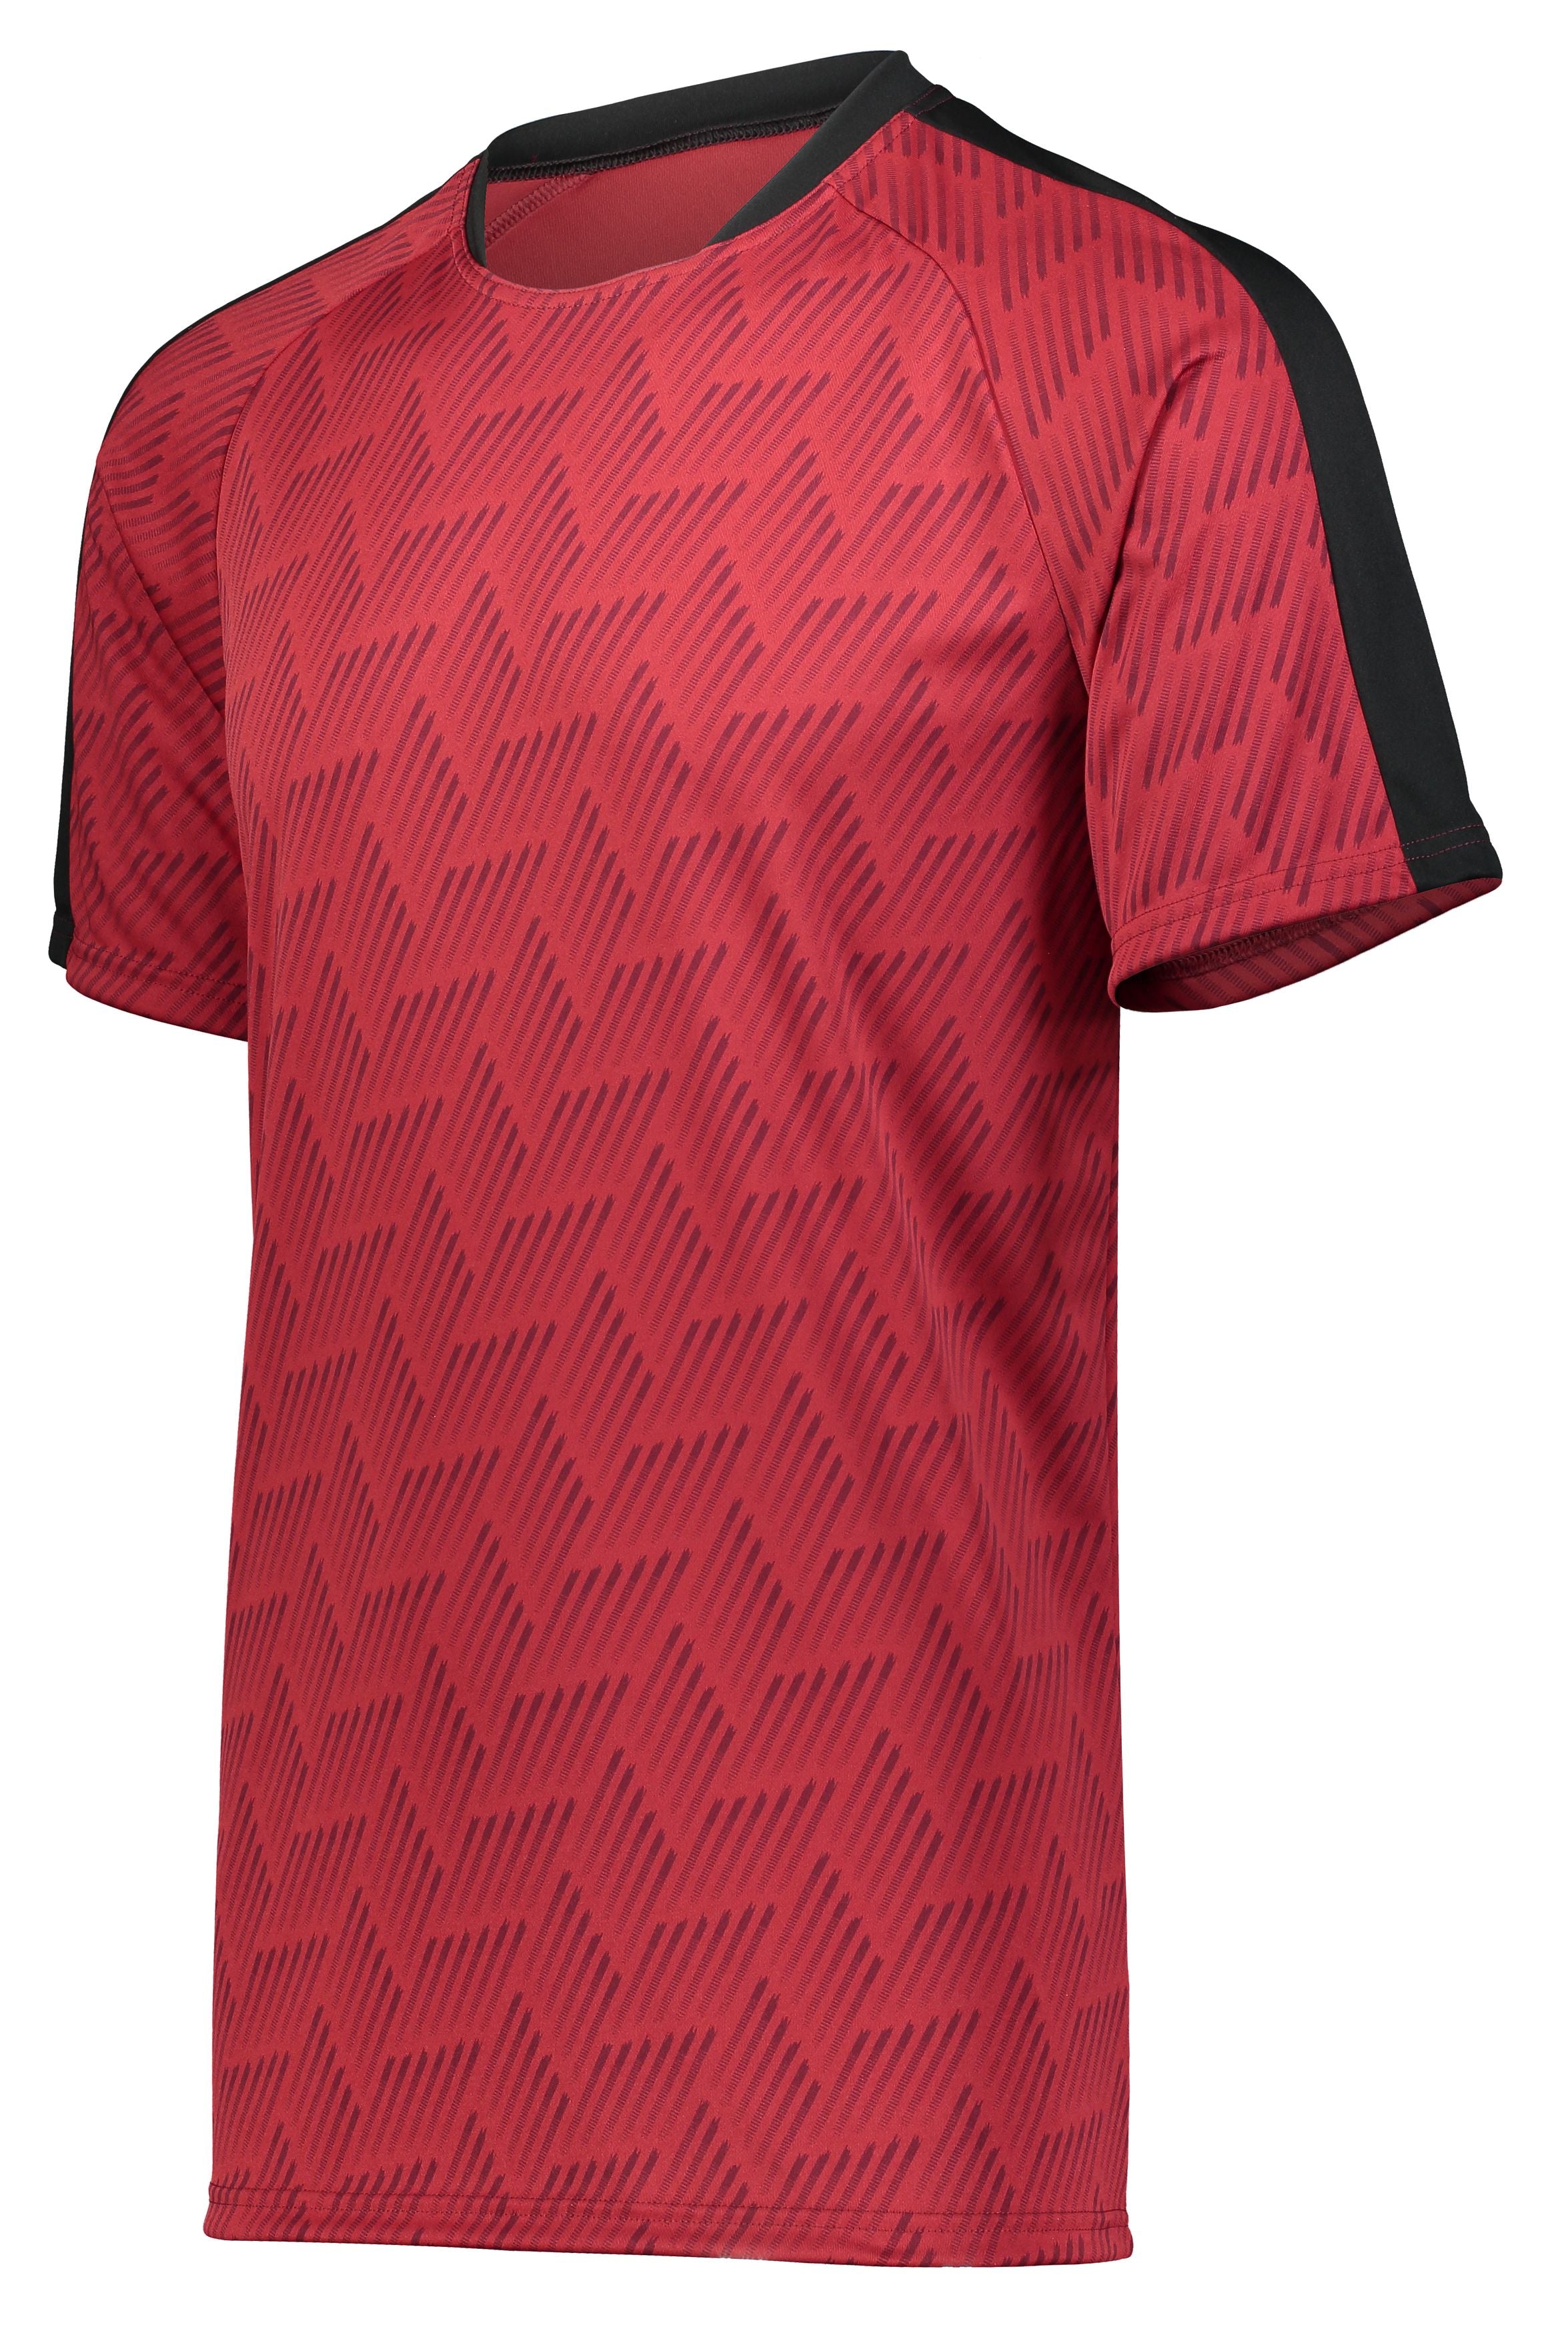 High 5 Hypervolt Jersey in Maroon Print/Black  -Part of the Adult, Adult-Jersey, High5-Products, Soccer, Shirts, All-Sports-1 product lines at KanaleyCreations.com